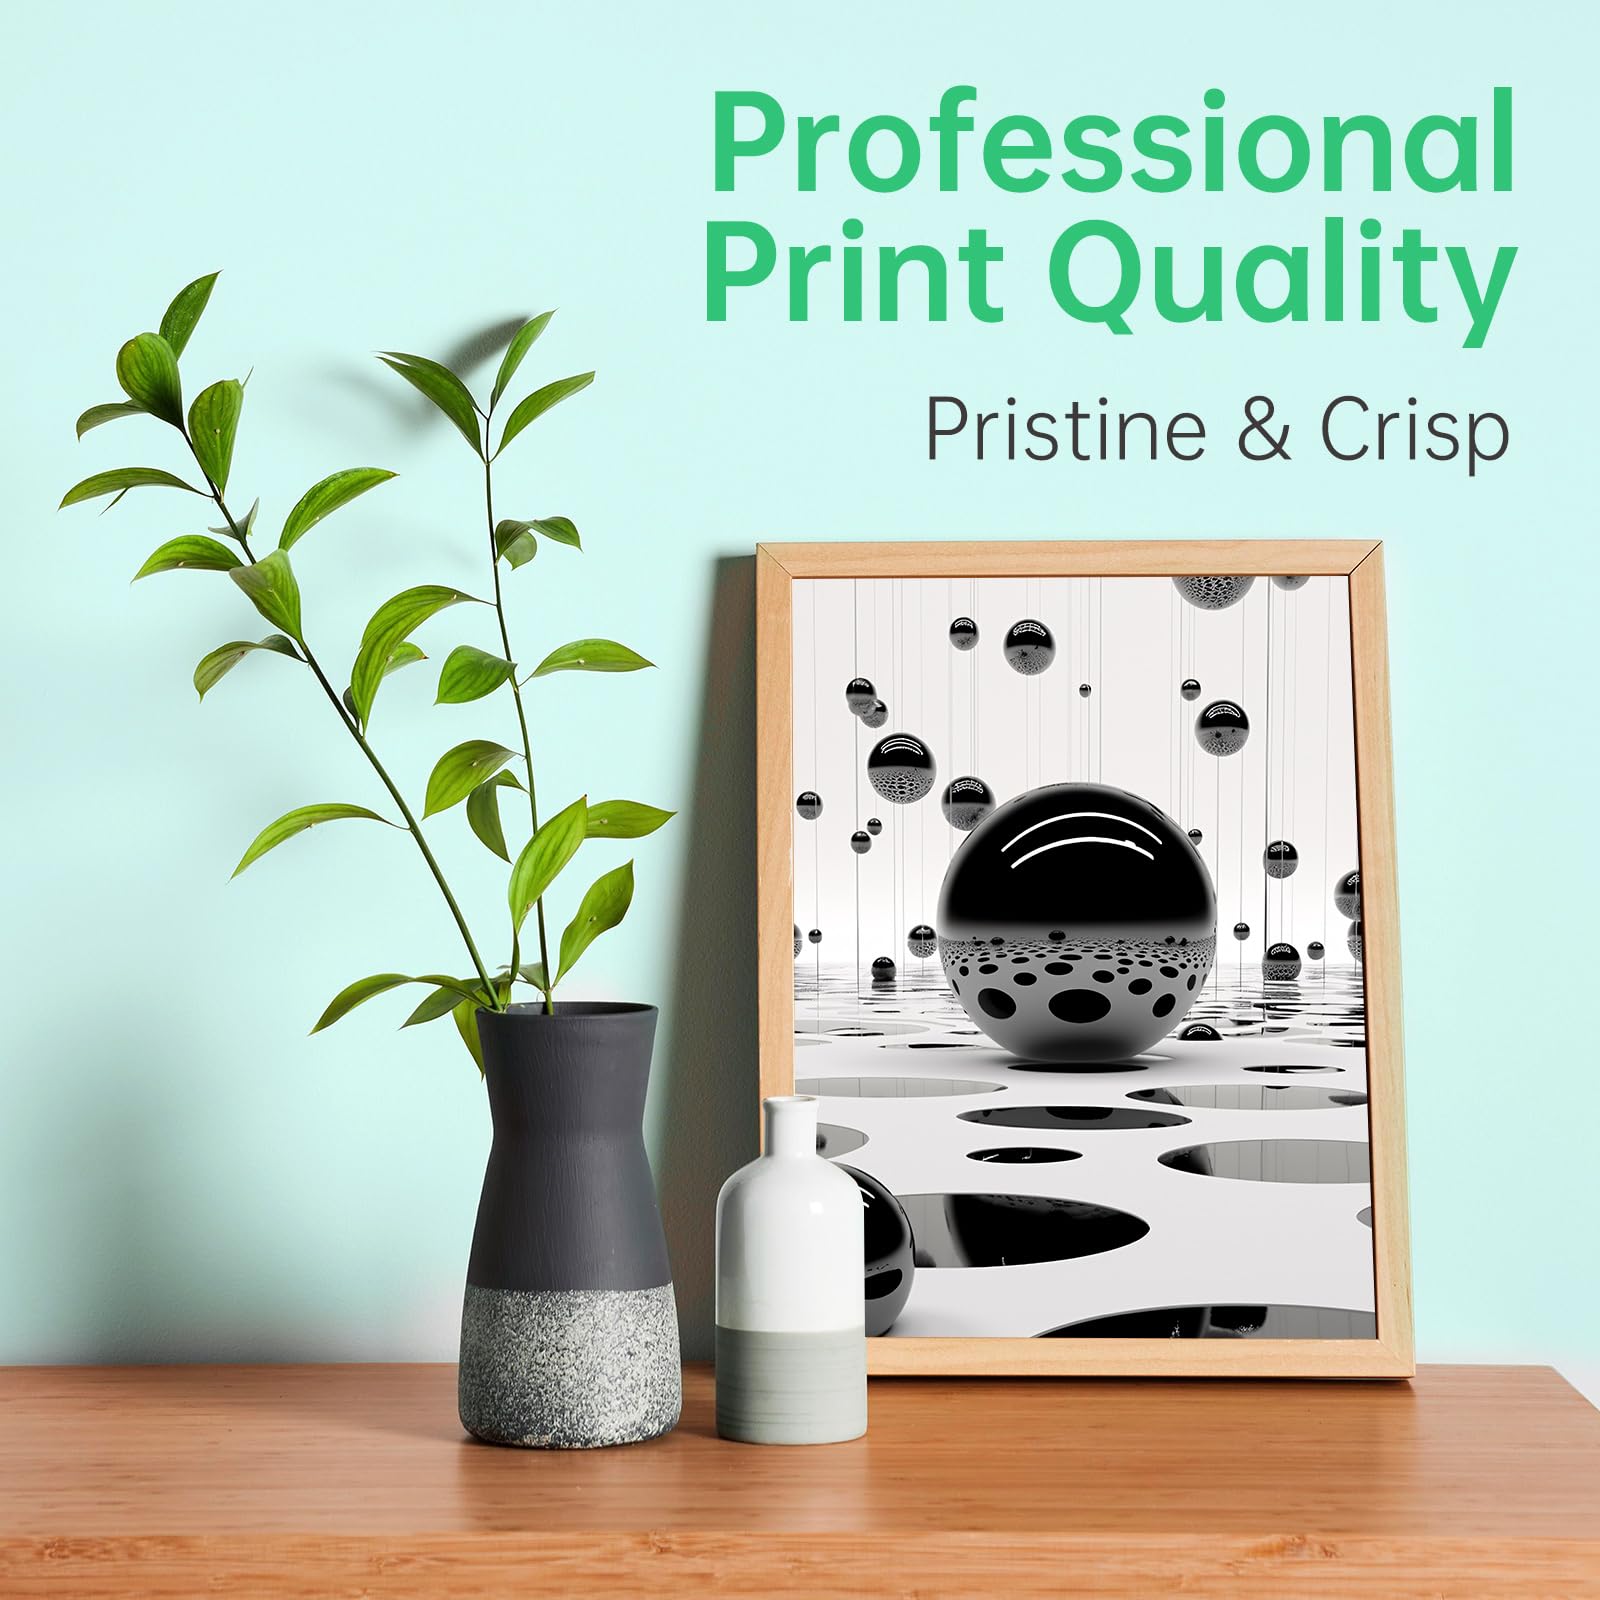 Professional print quality with a pristine and crisp image displayed in a frame, highlighting the high-quality print output of LEMERO ink cartridges.